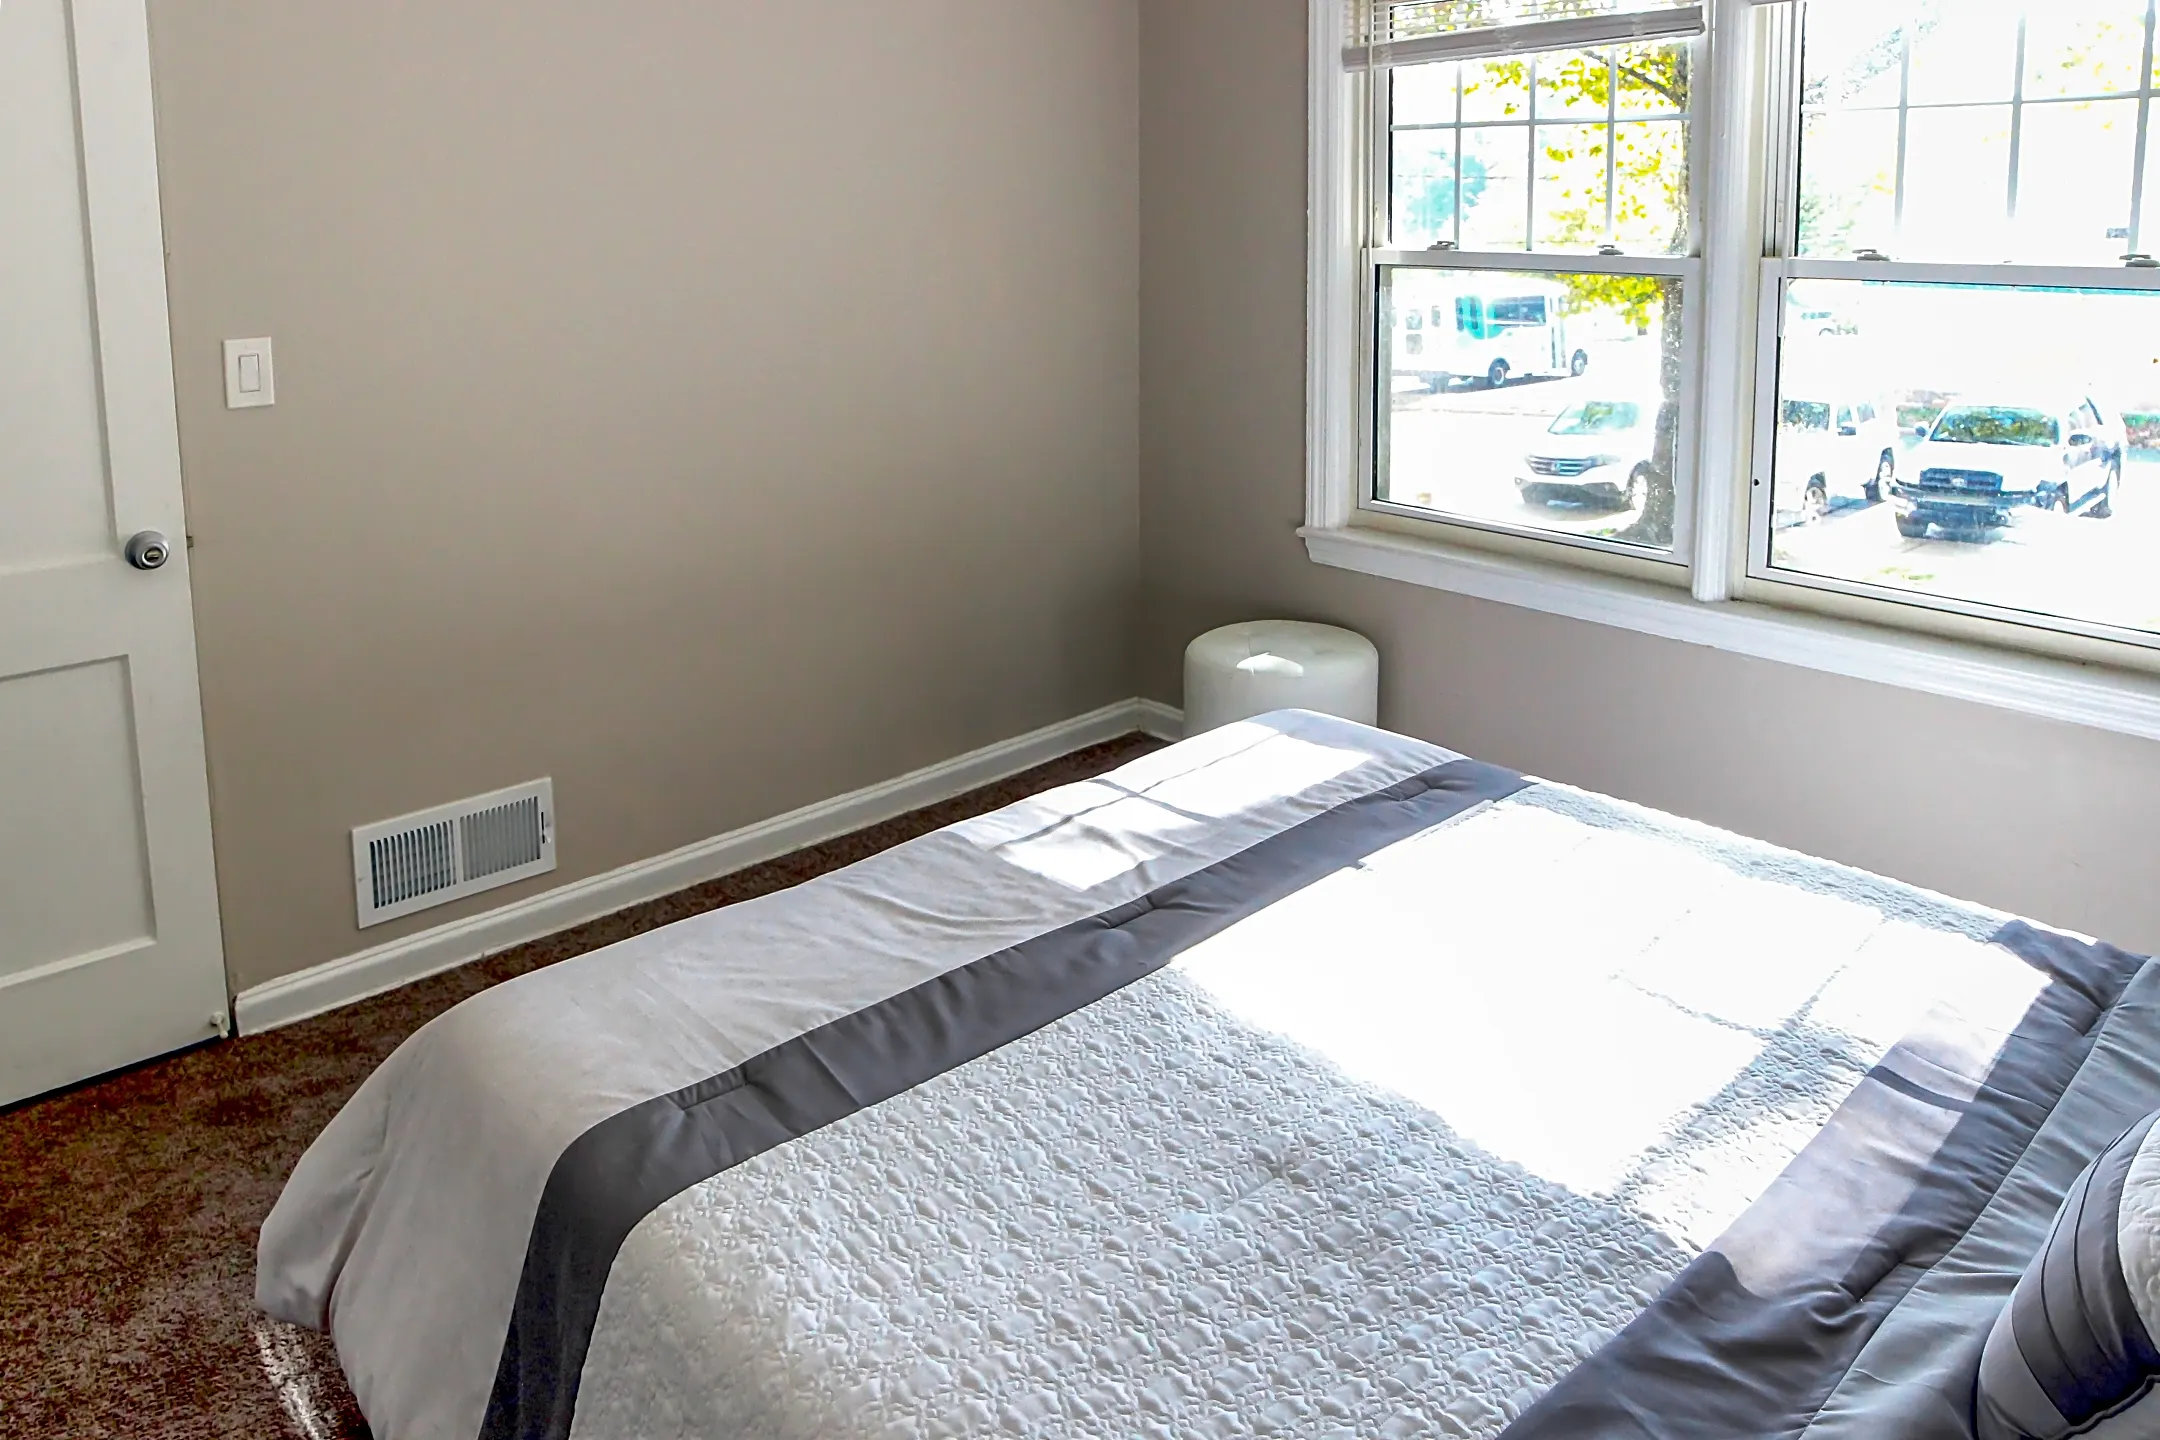 Bedroom - High Pointe Apartments - Allentown, PA